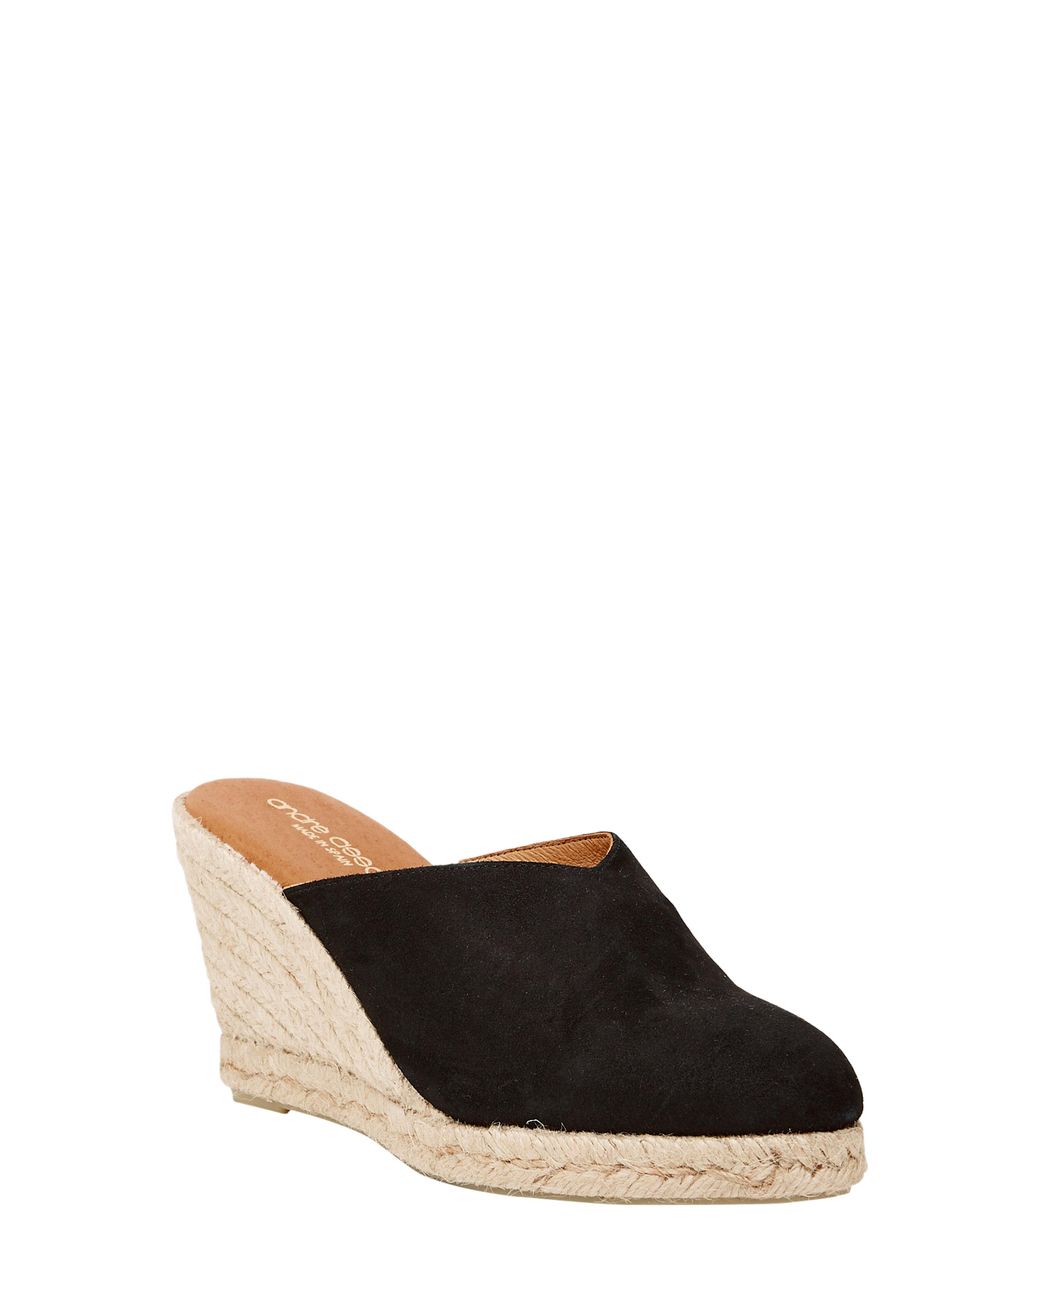 Andre Assous Romy Wedge Mule | Lyst